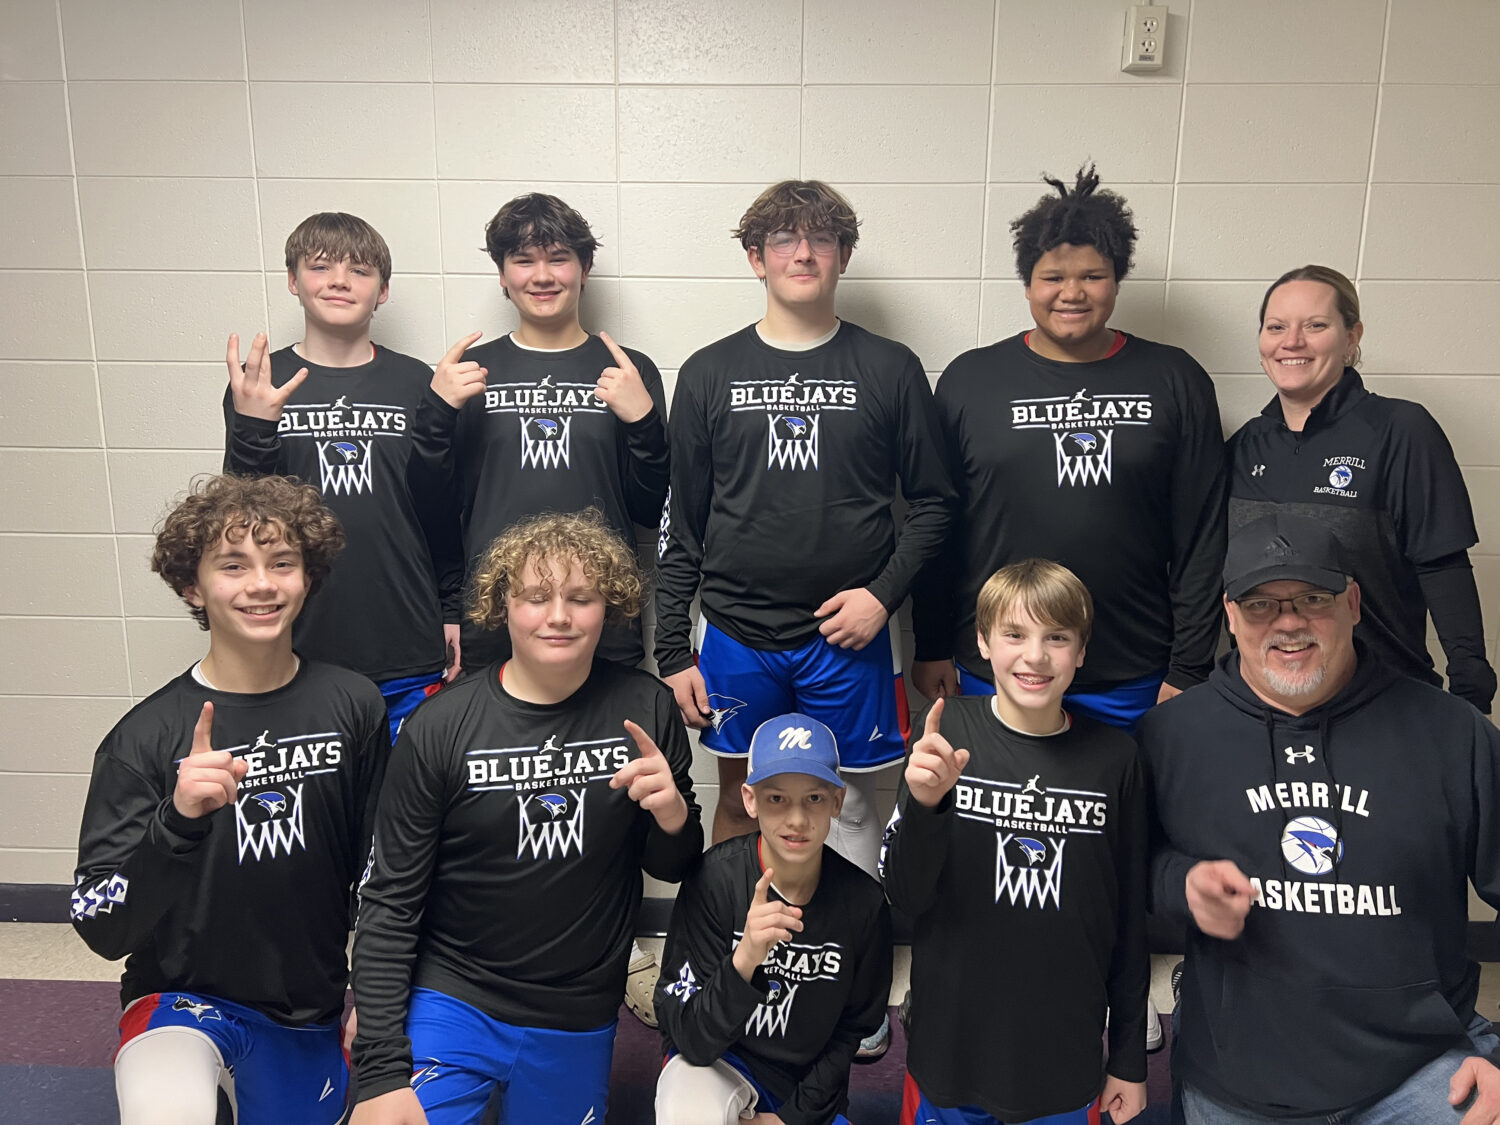 Merrill Seventh Grade Traveling Basketball Team headed to State